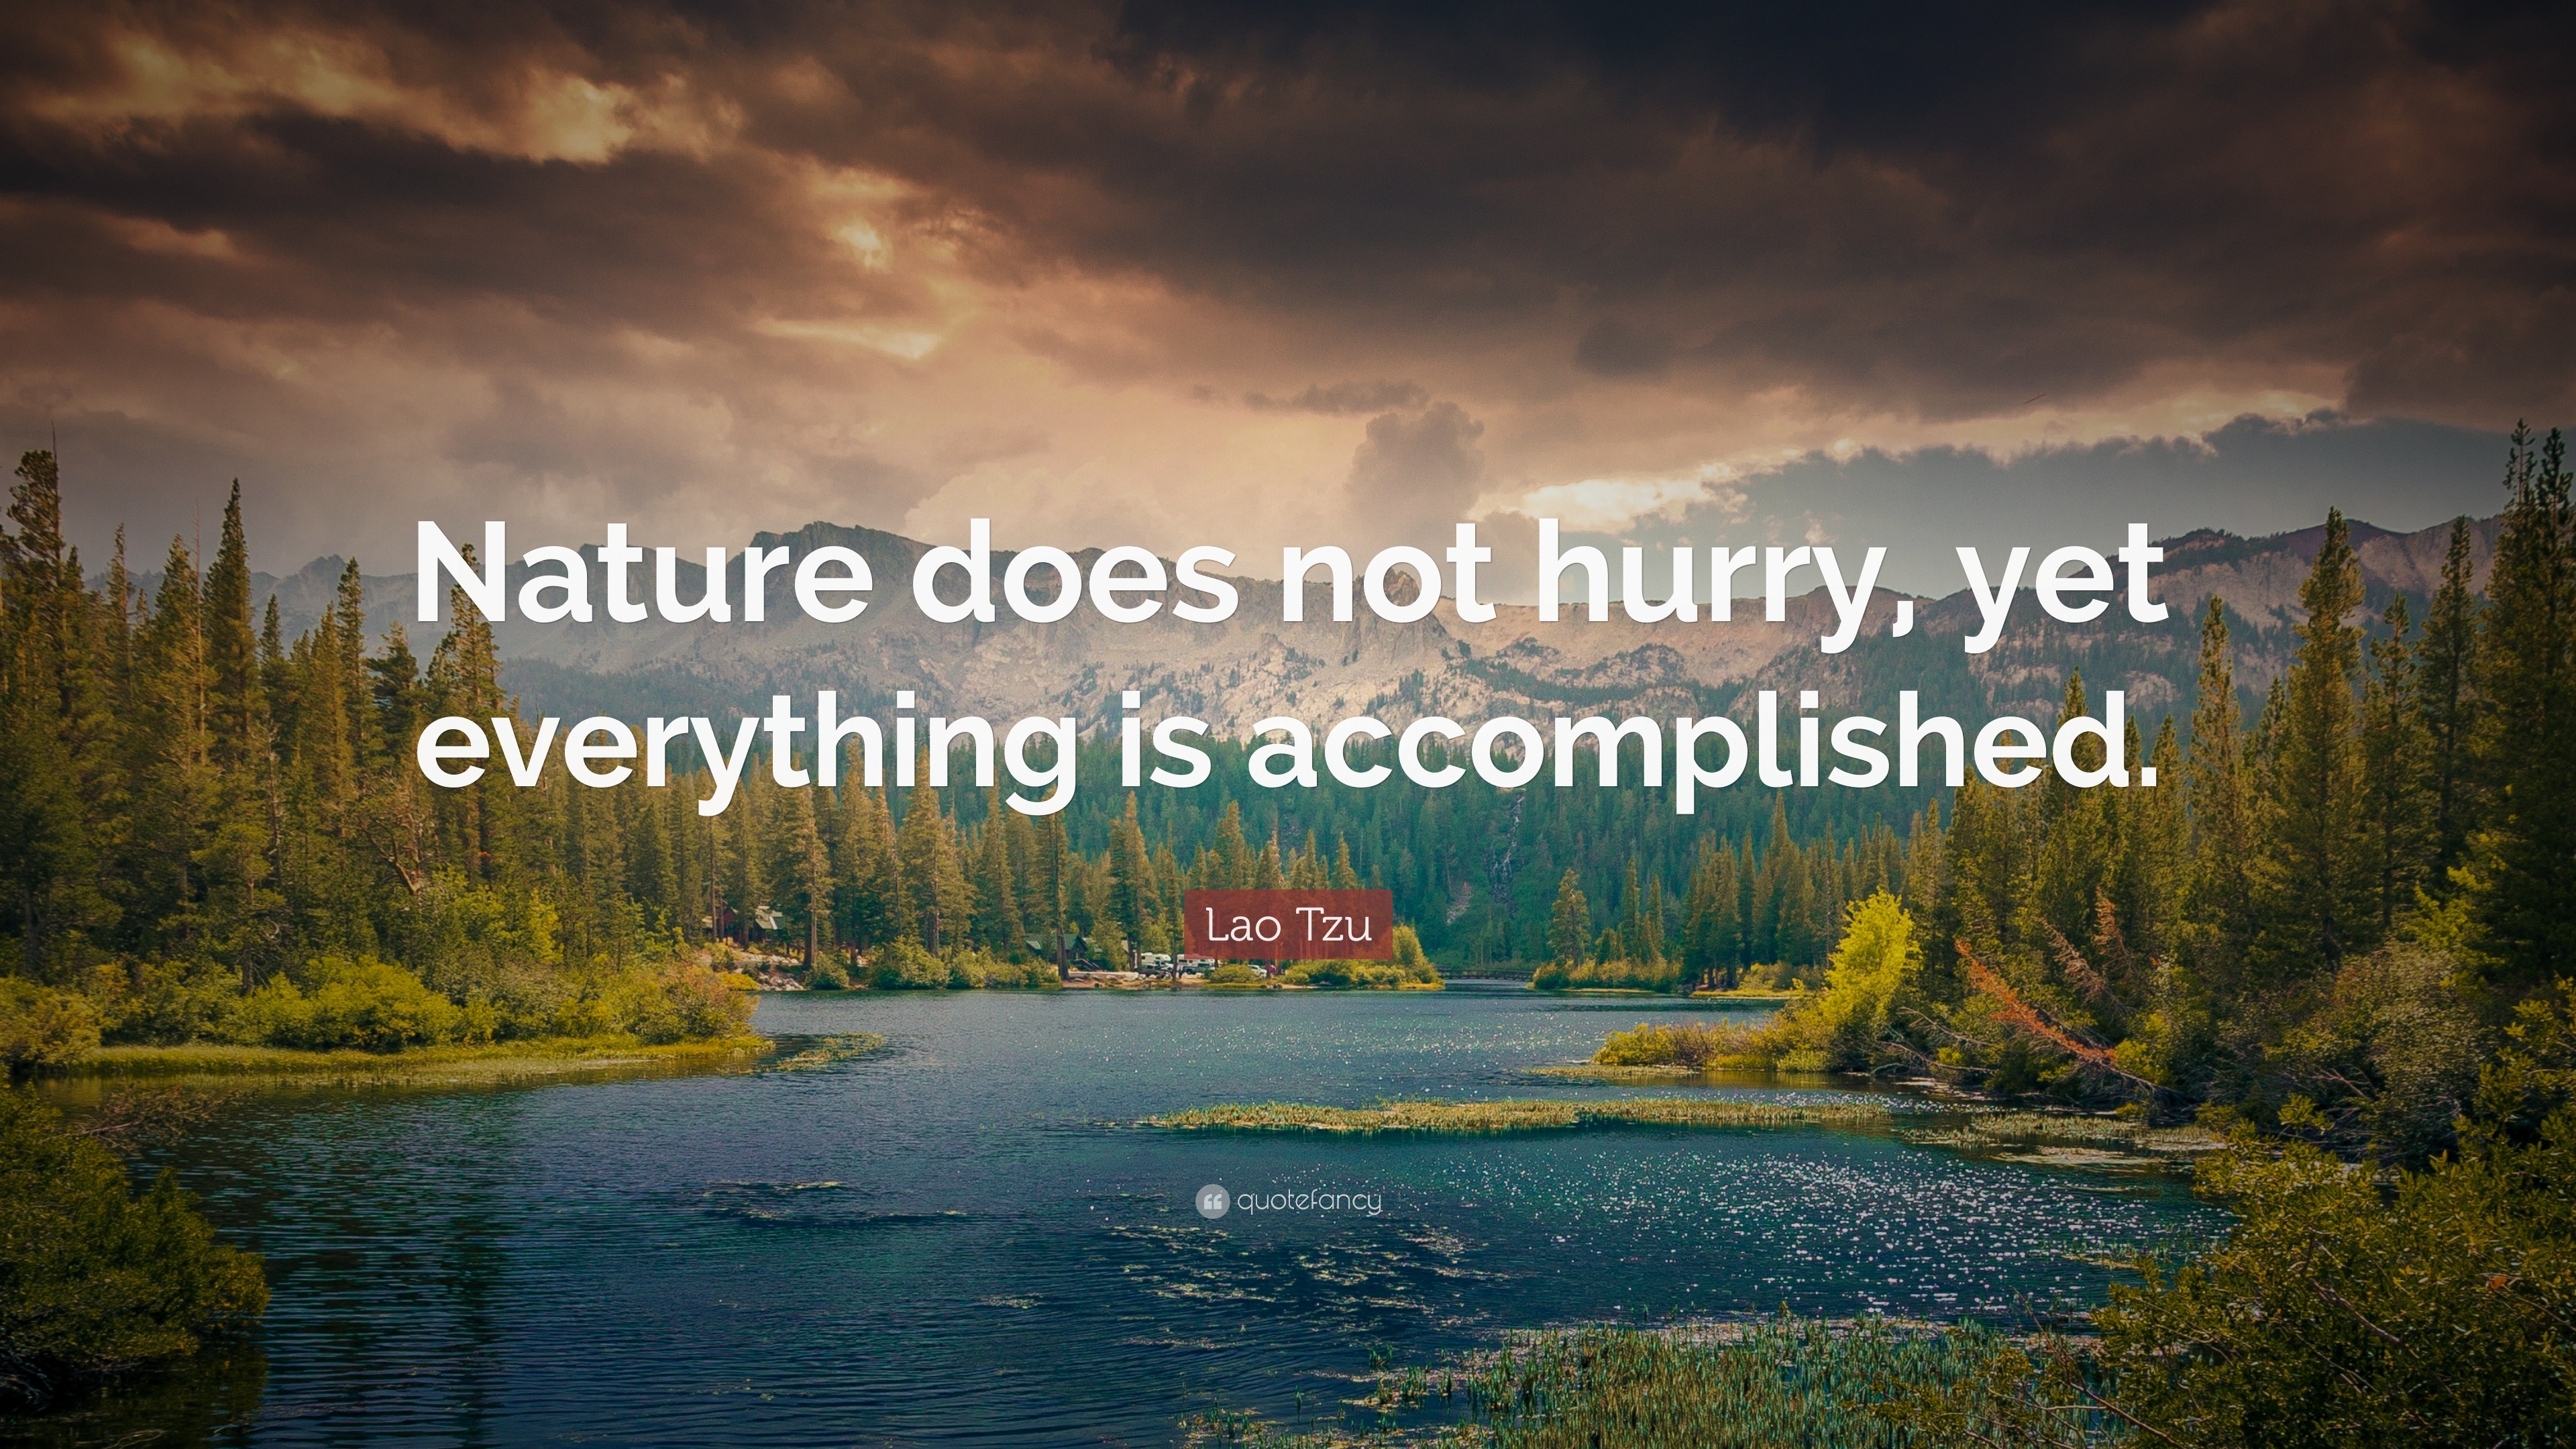 Lao Tzu Quote: “Nature does not hurry, yet everything is accomplished ...